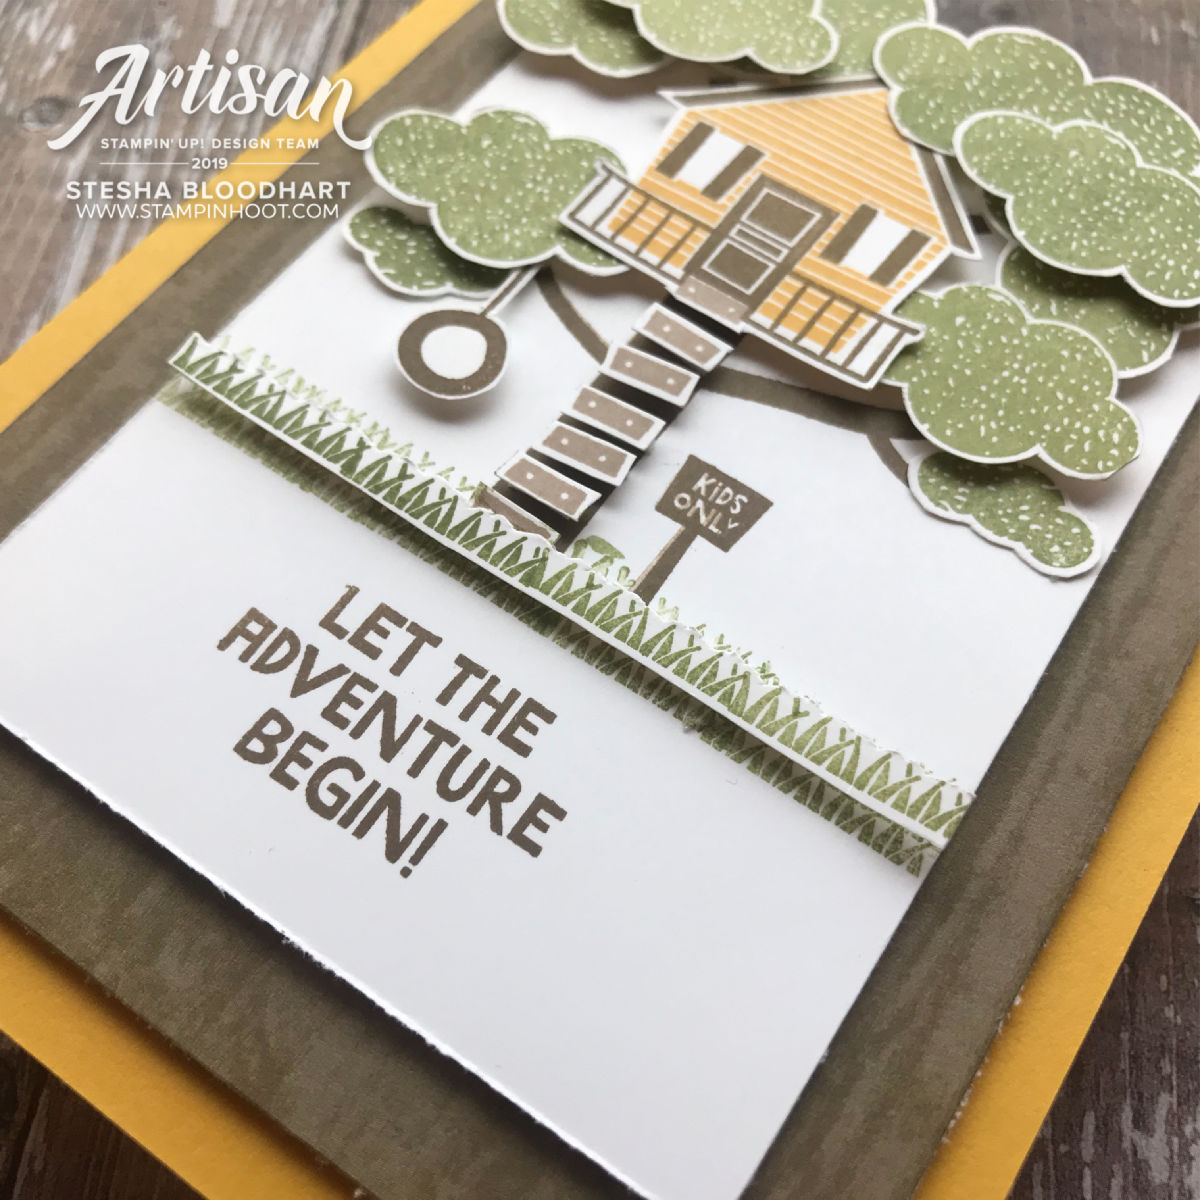 Treehouse Adventure Stamp Set by Stampin' Up! Card created by Stesha Bloodhart, Stampin' Hoot! #steshabloodhart #stampinhoot